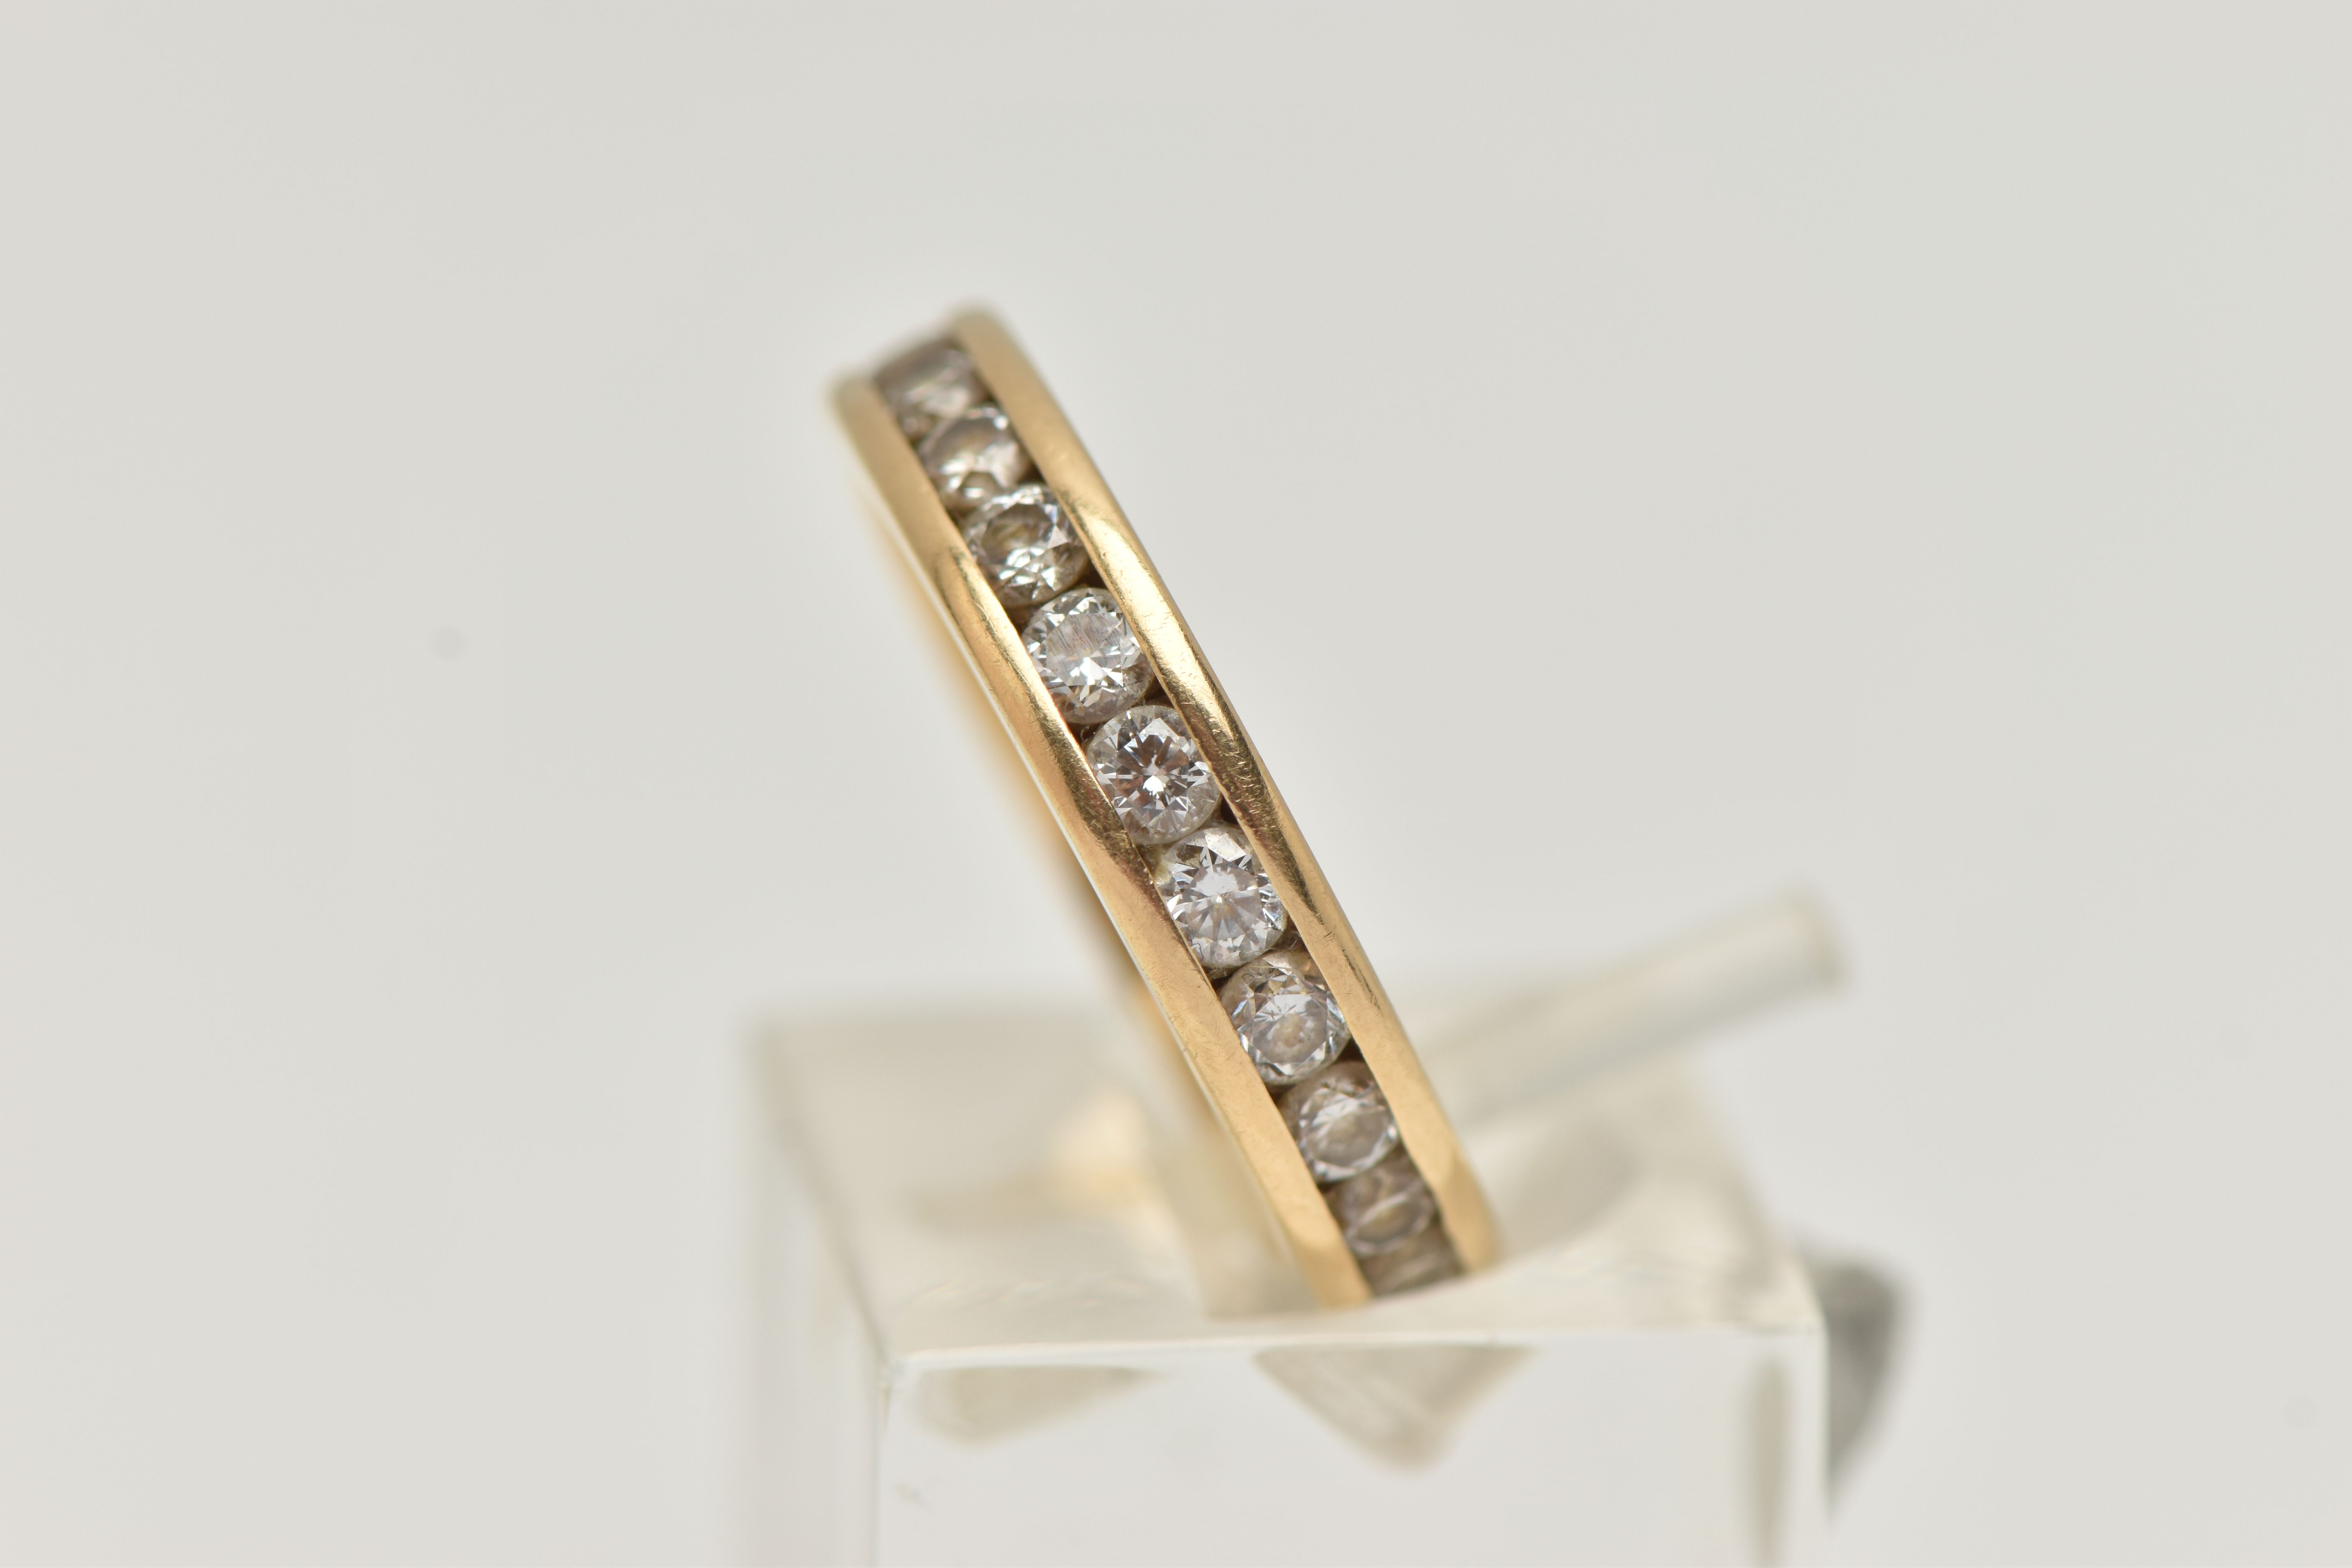 AN 18CT GOLD DIAMOND FULL ETERNITY BAND RING, channel set with twenty four round brilliant cut - Image 2 of 4